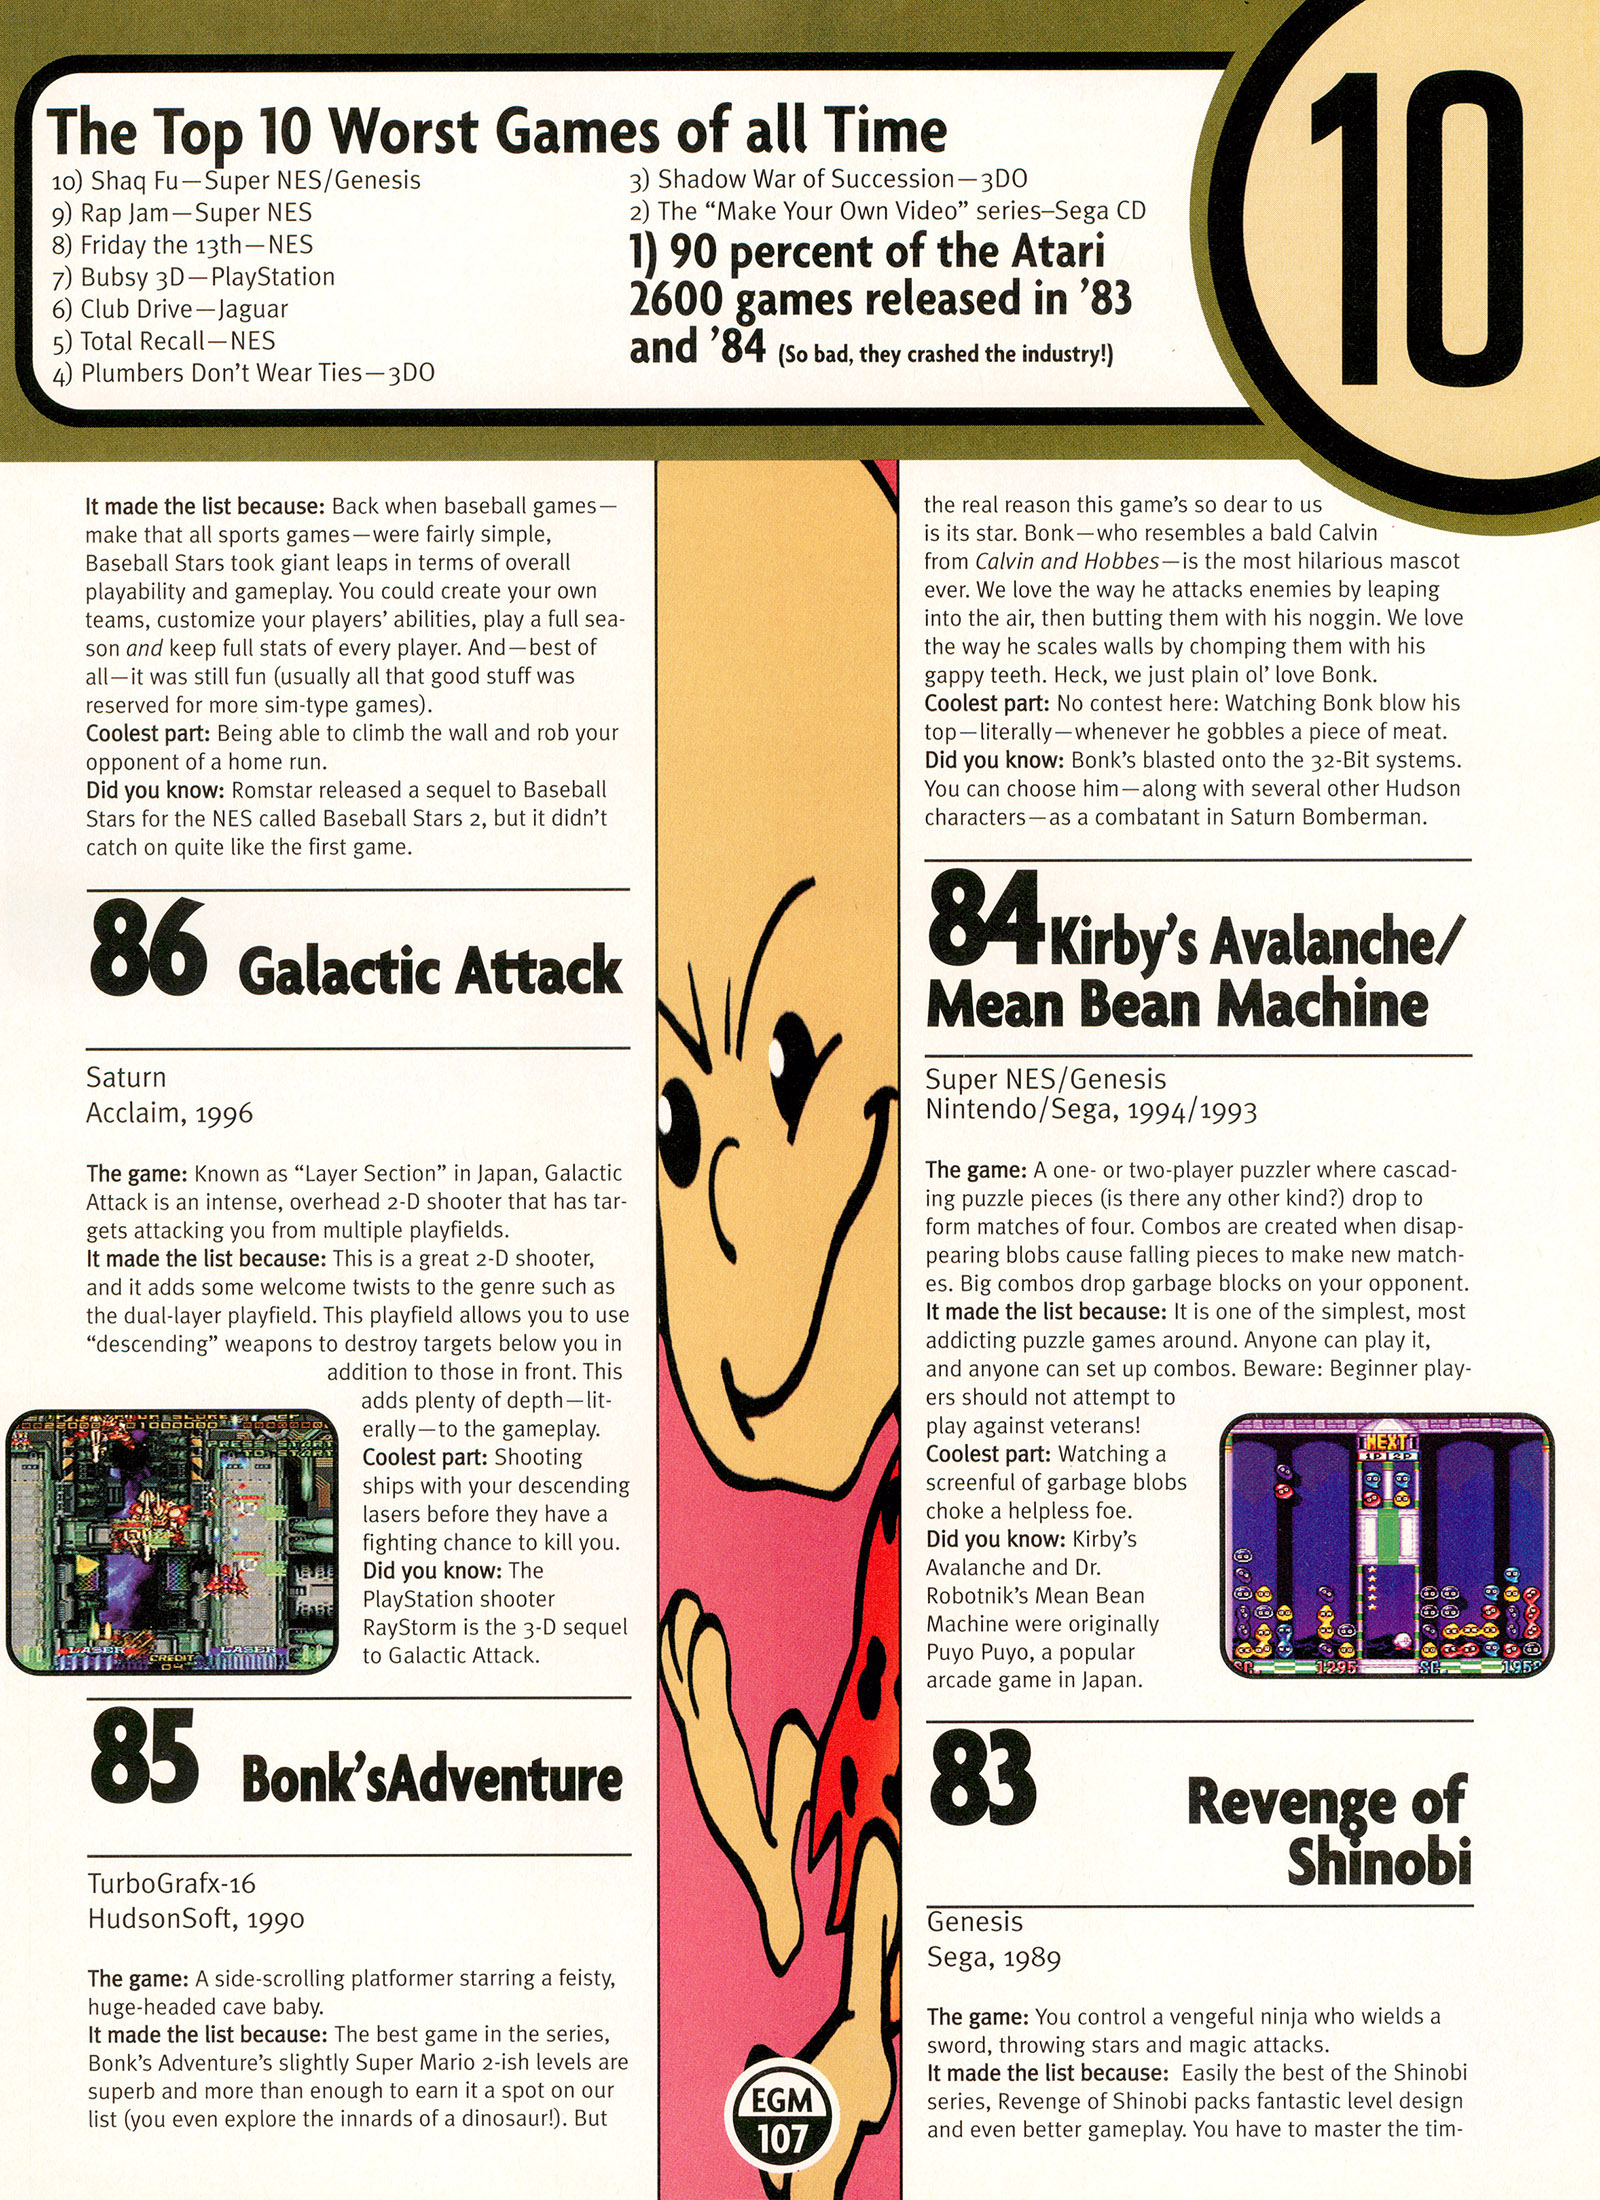 100 Best Games of All Time, Electronic Gaming Monthly November 1997 page 107